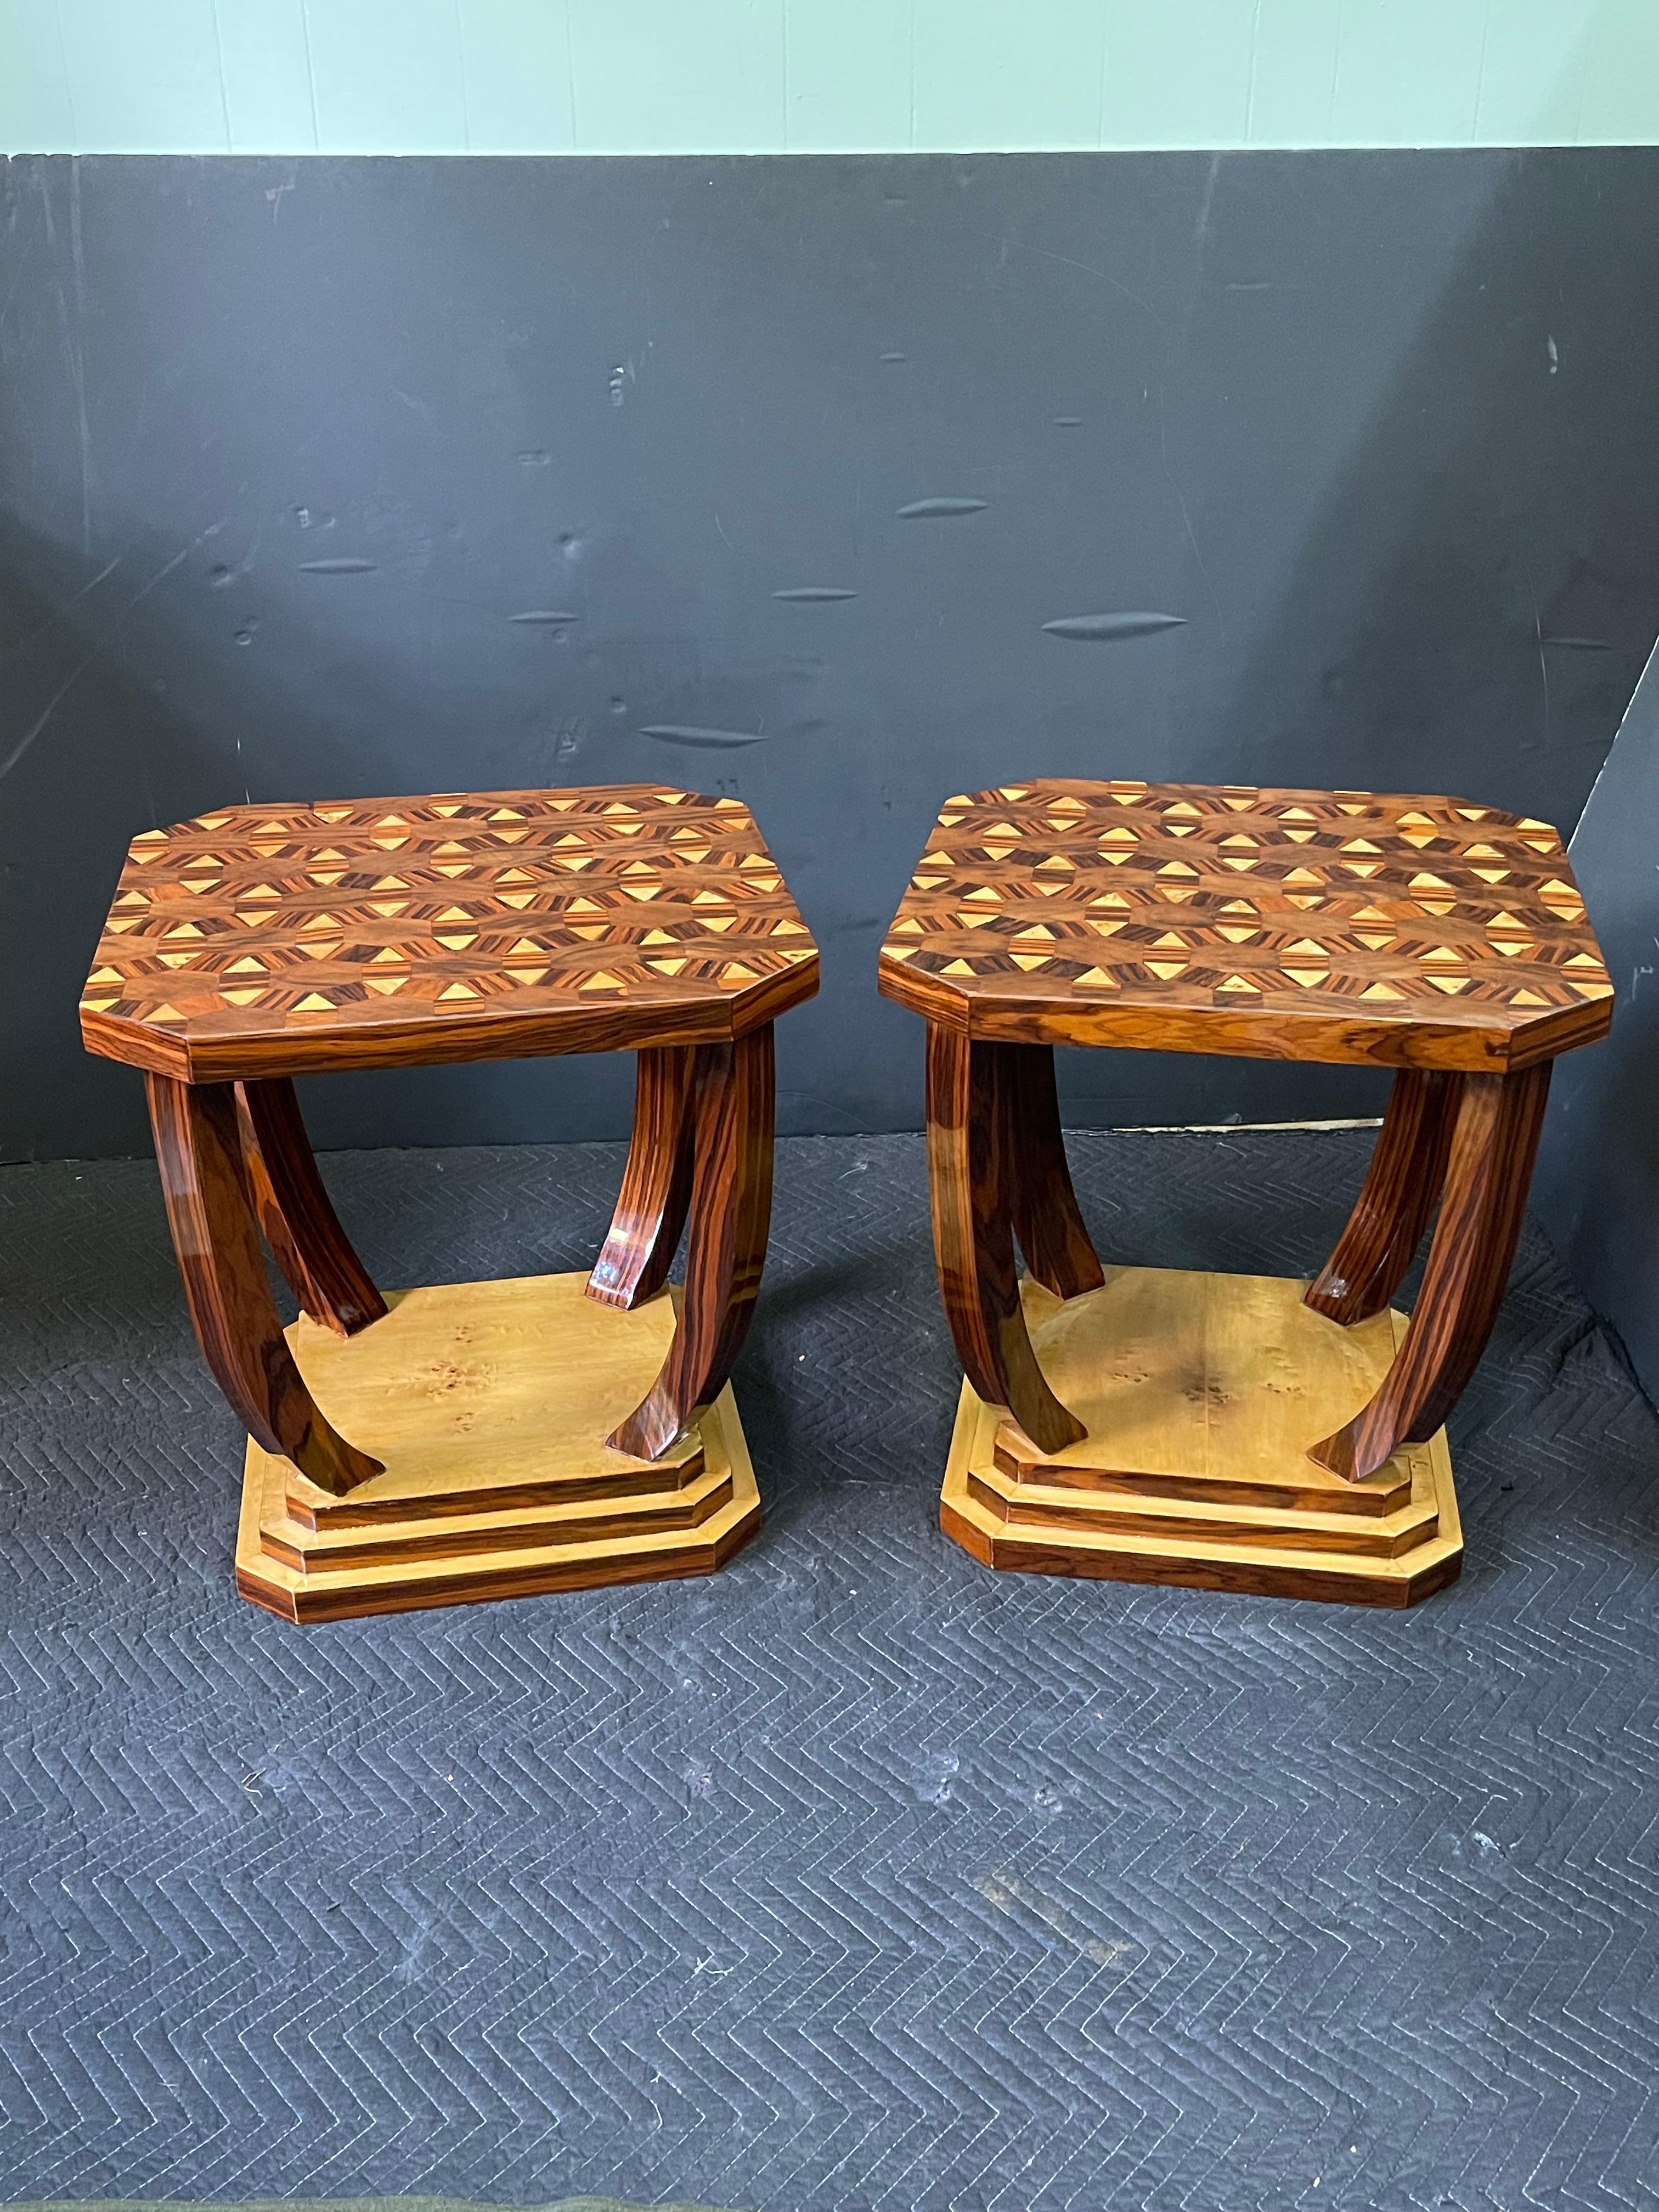 A wonderful pair of 20th century French burl wood side tables in the style of Art Deco. These square side tables are open with canted corners. The thick tops feature geometric marquetry inlays of burled walnut and birds eye maple. They are supported